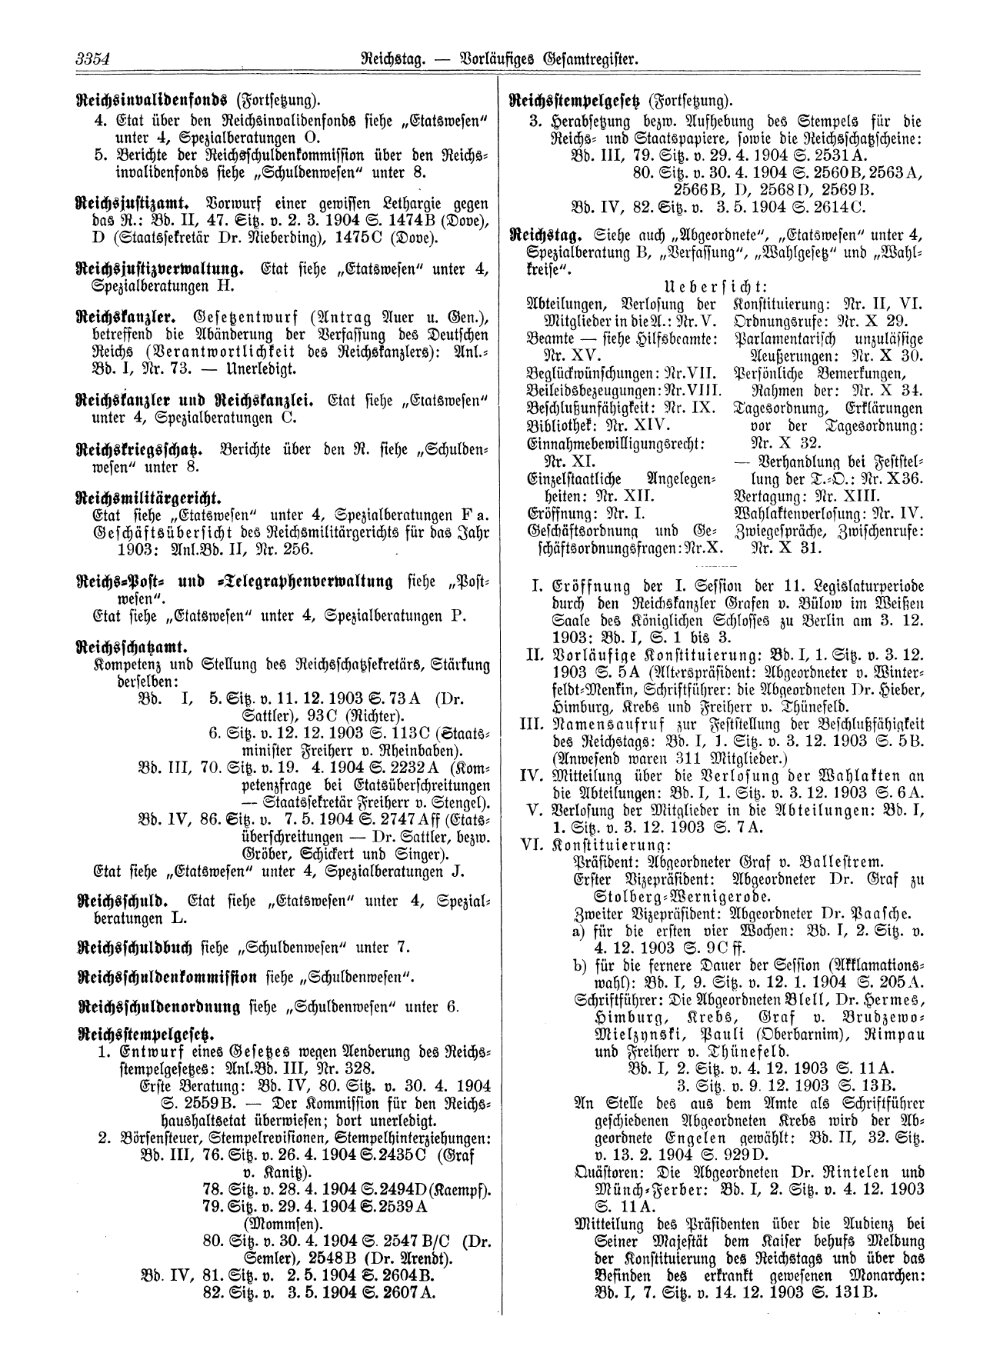 Scan of page 3354